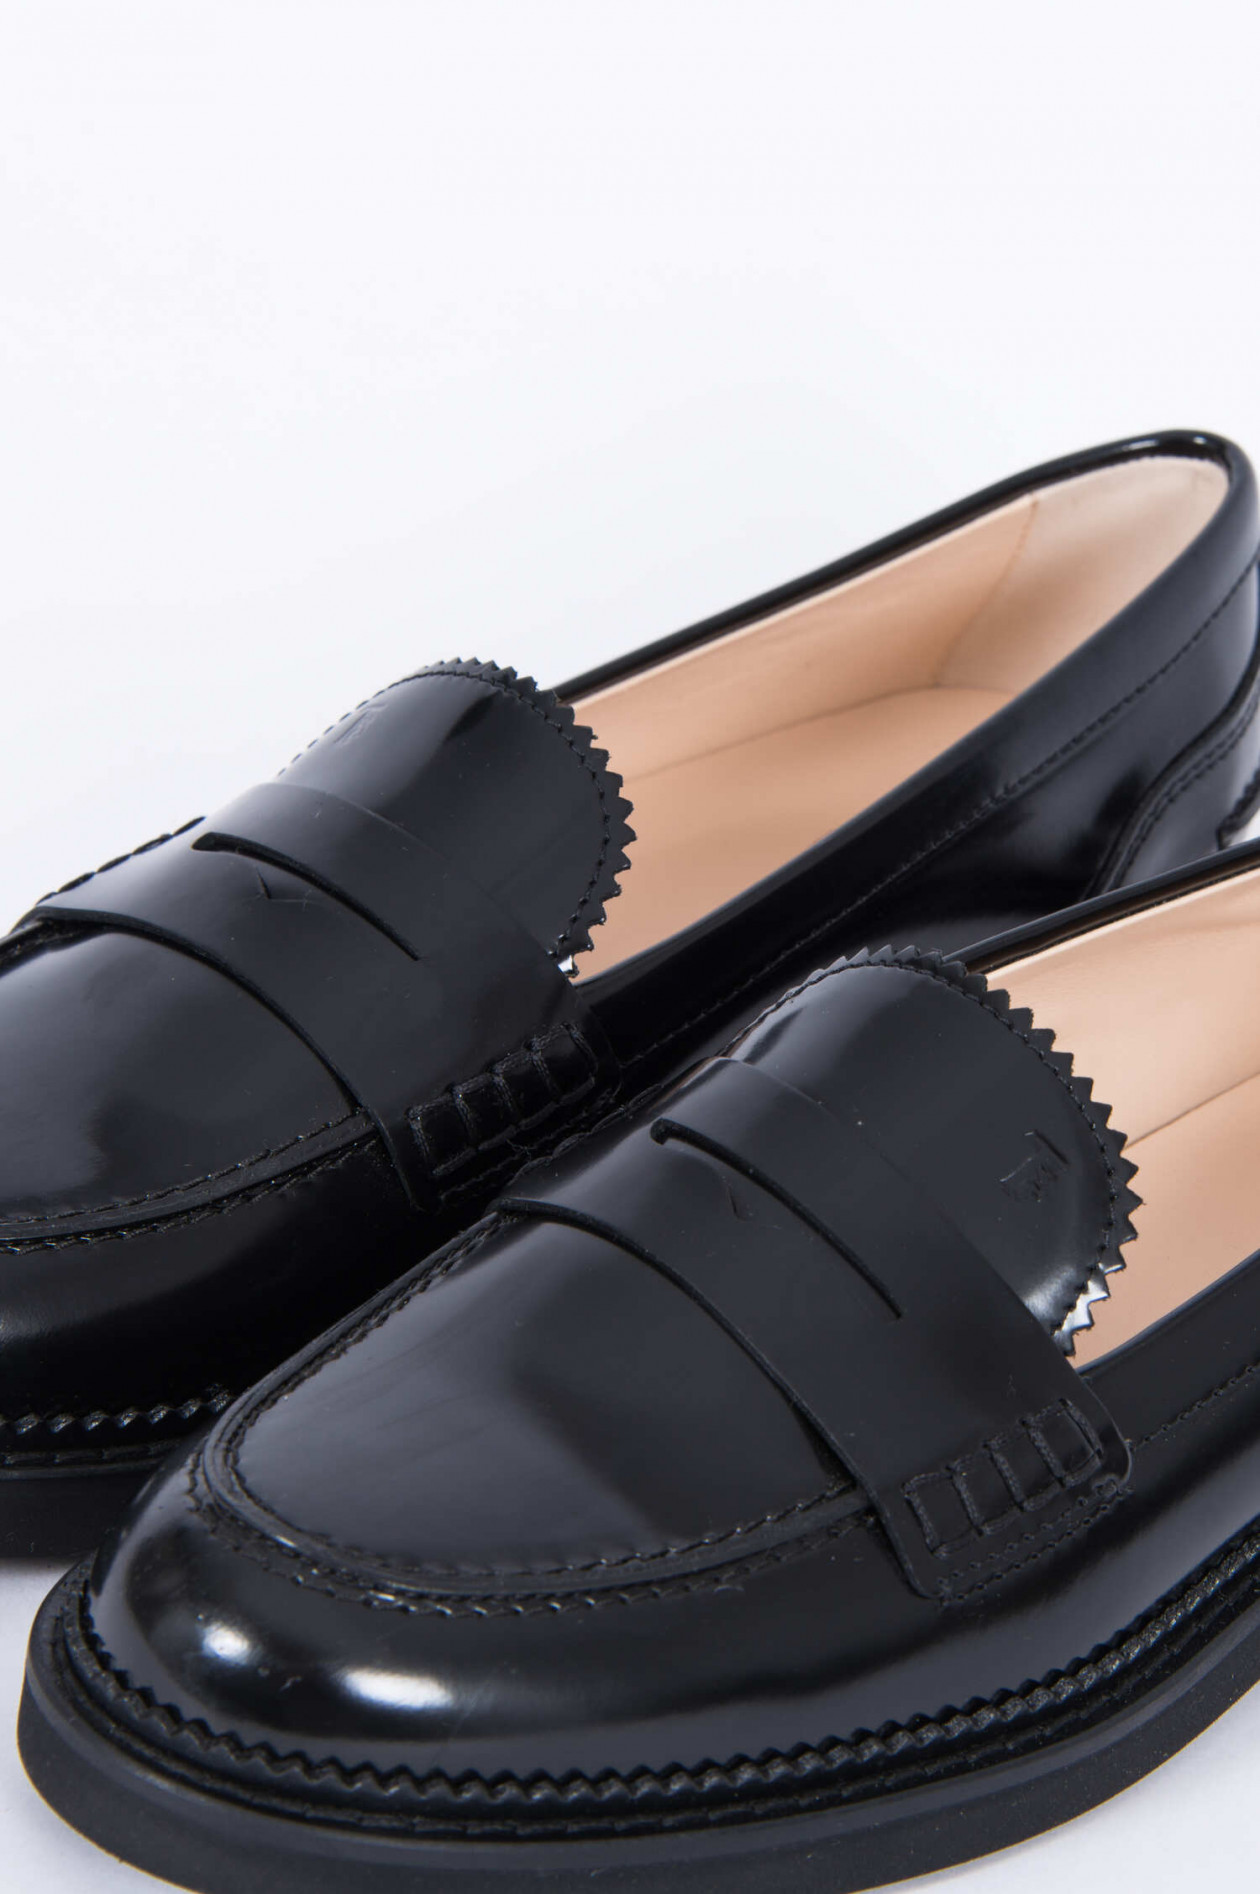 Schuh Schwarz Loafers Review 9574e